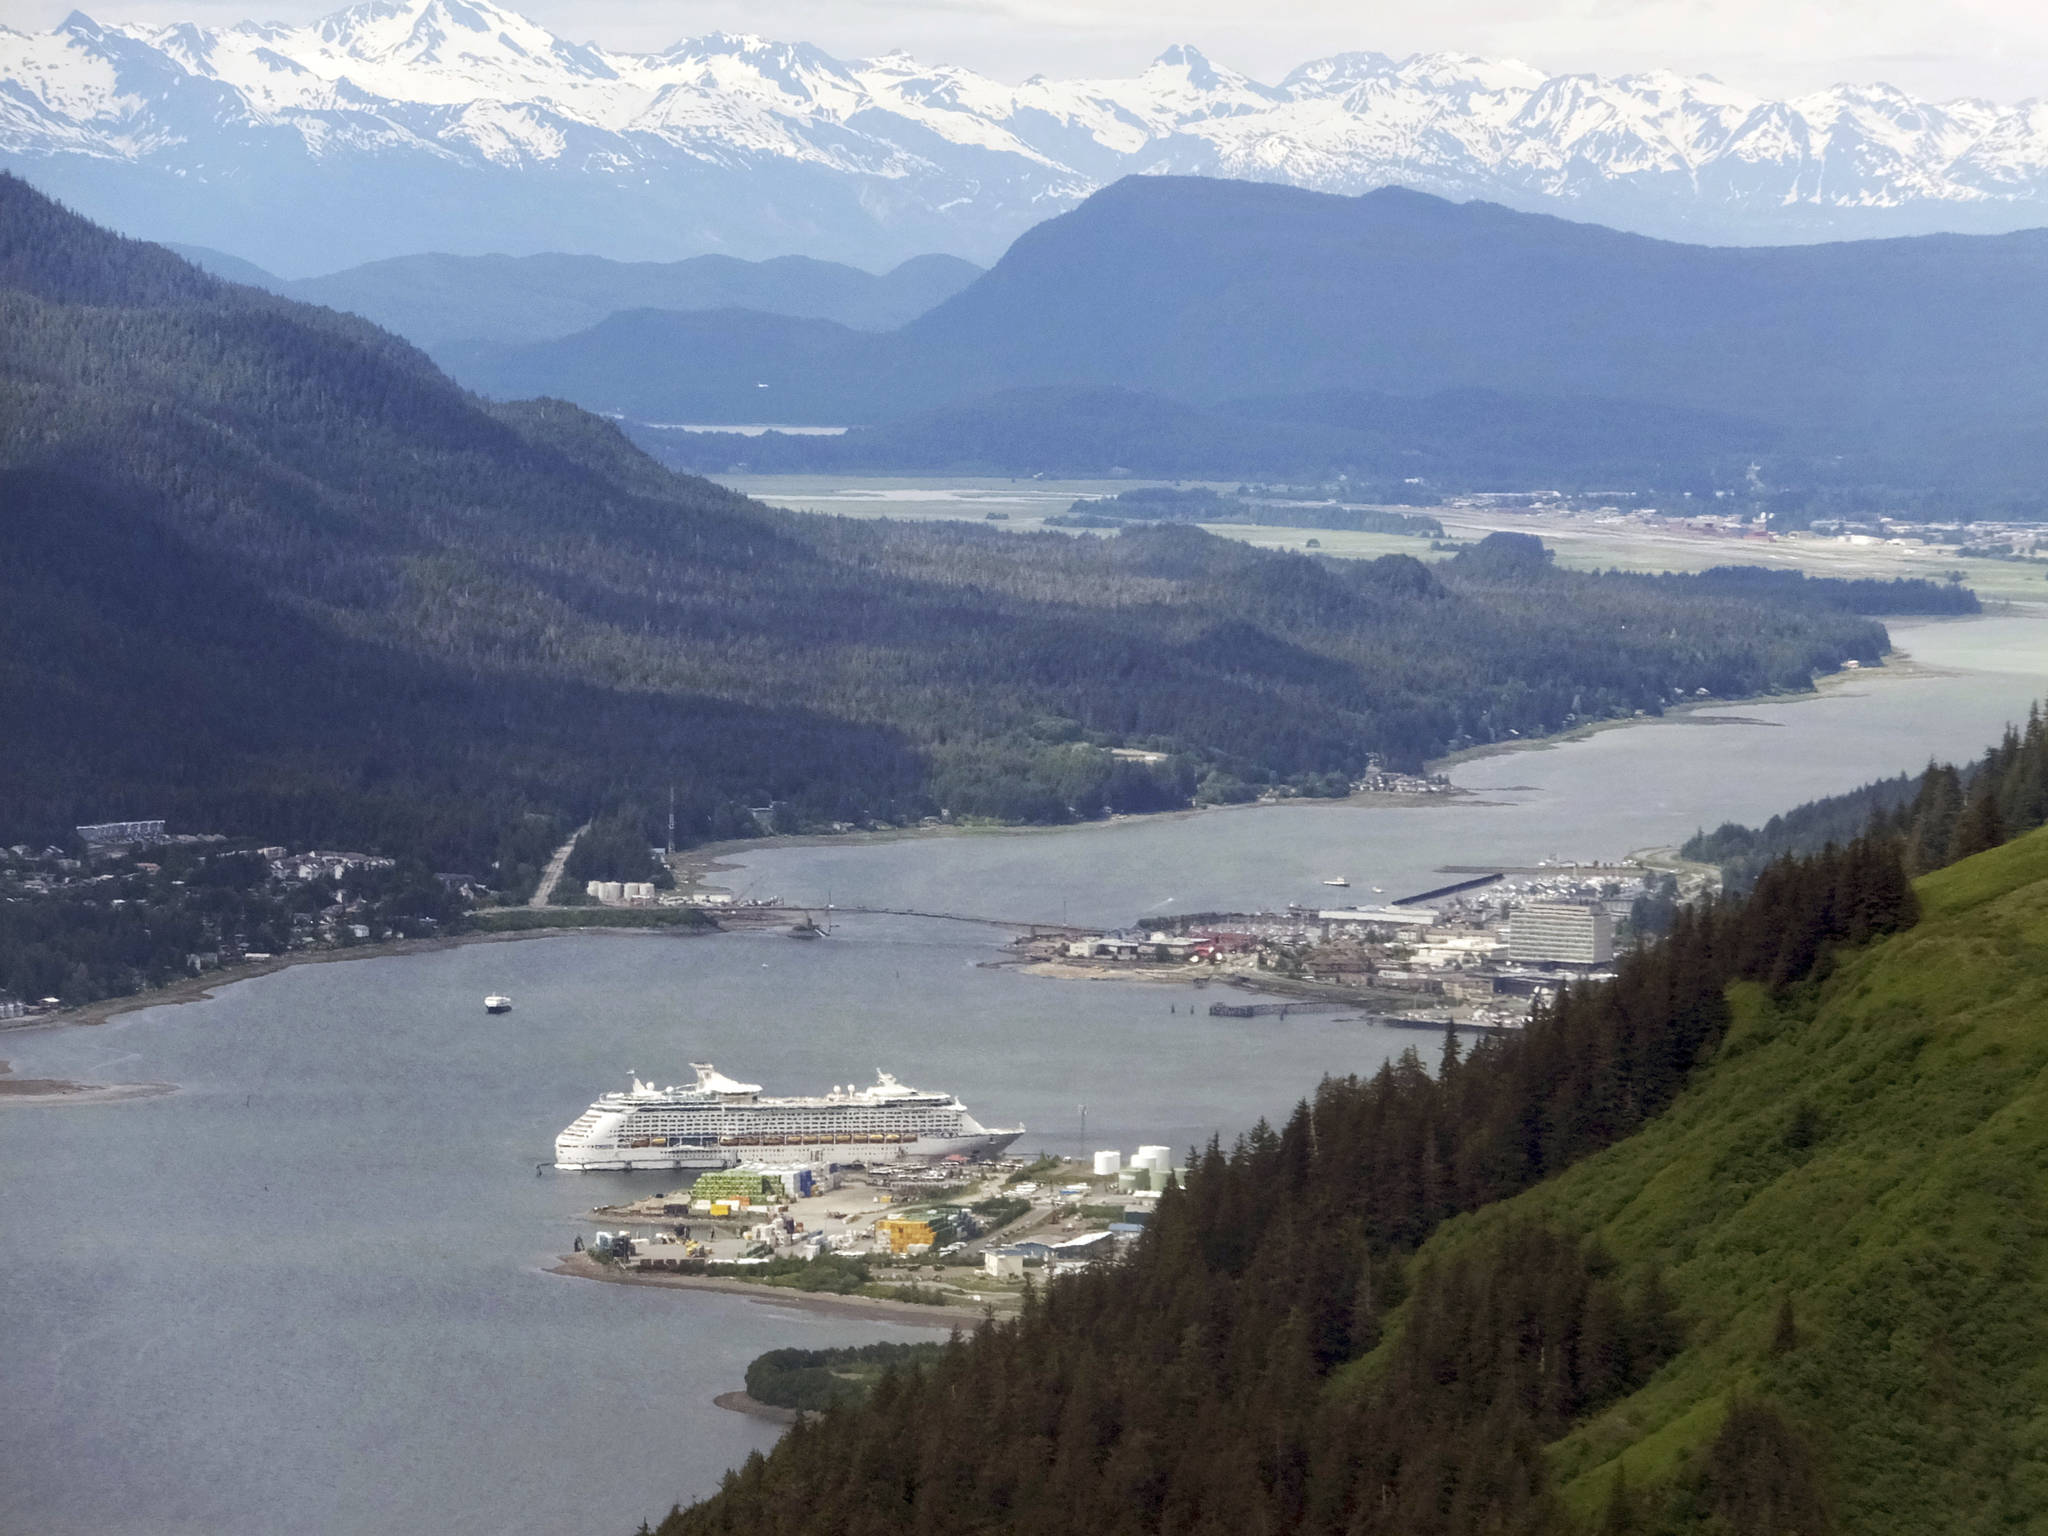 FILE- In this June 4, 2017 file photo, a cruise ship sits docked near downtown Juneau, Alaska. The tax bill approved Saturday, Dec. 2, 2017, by the U.S. Senate will open part of the Arctic National Wildlife Refuge to oil and gas drilling. The measure also struck down a proposed cruise ship tax that Republican Sen. Lisa Murkowski said would have disproportionately affected her state. (AP Photo/Becky Bohrer, File)